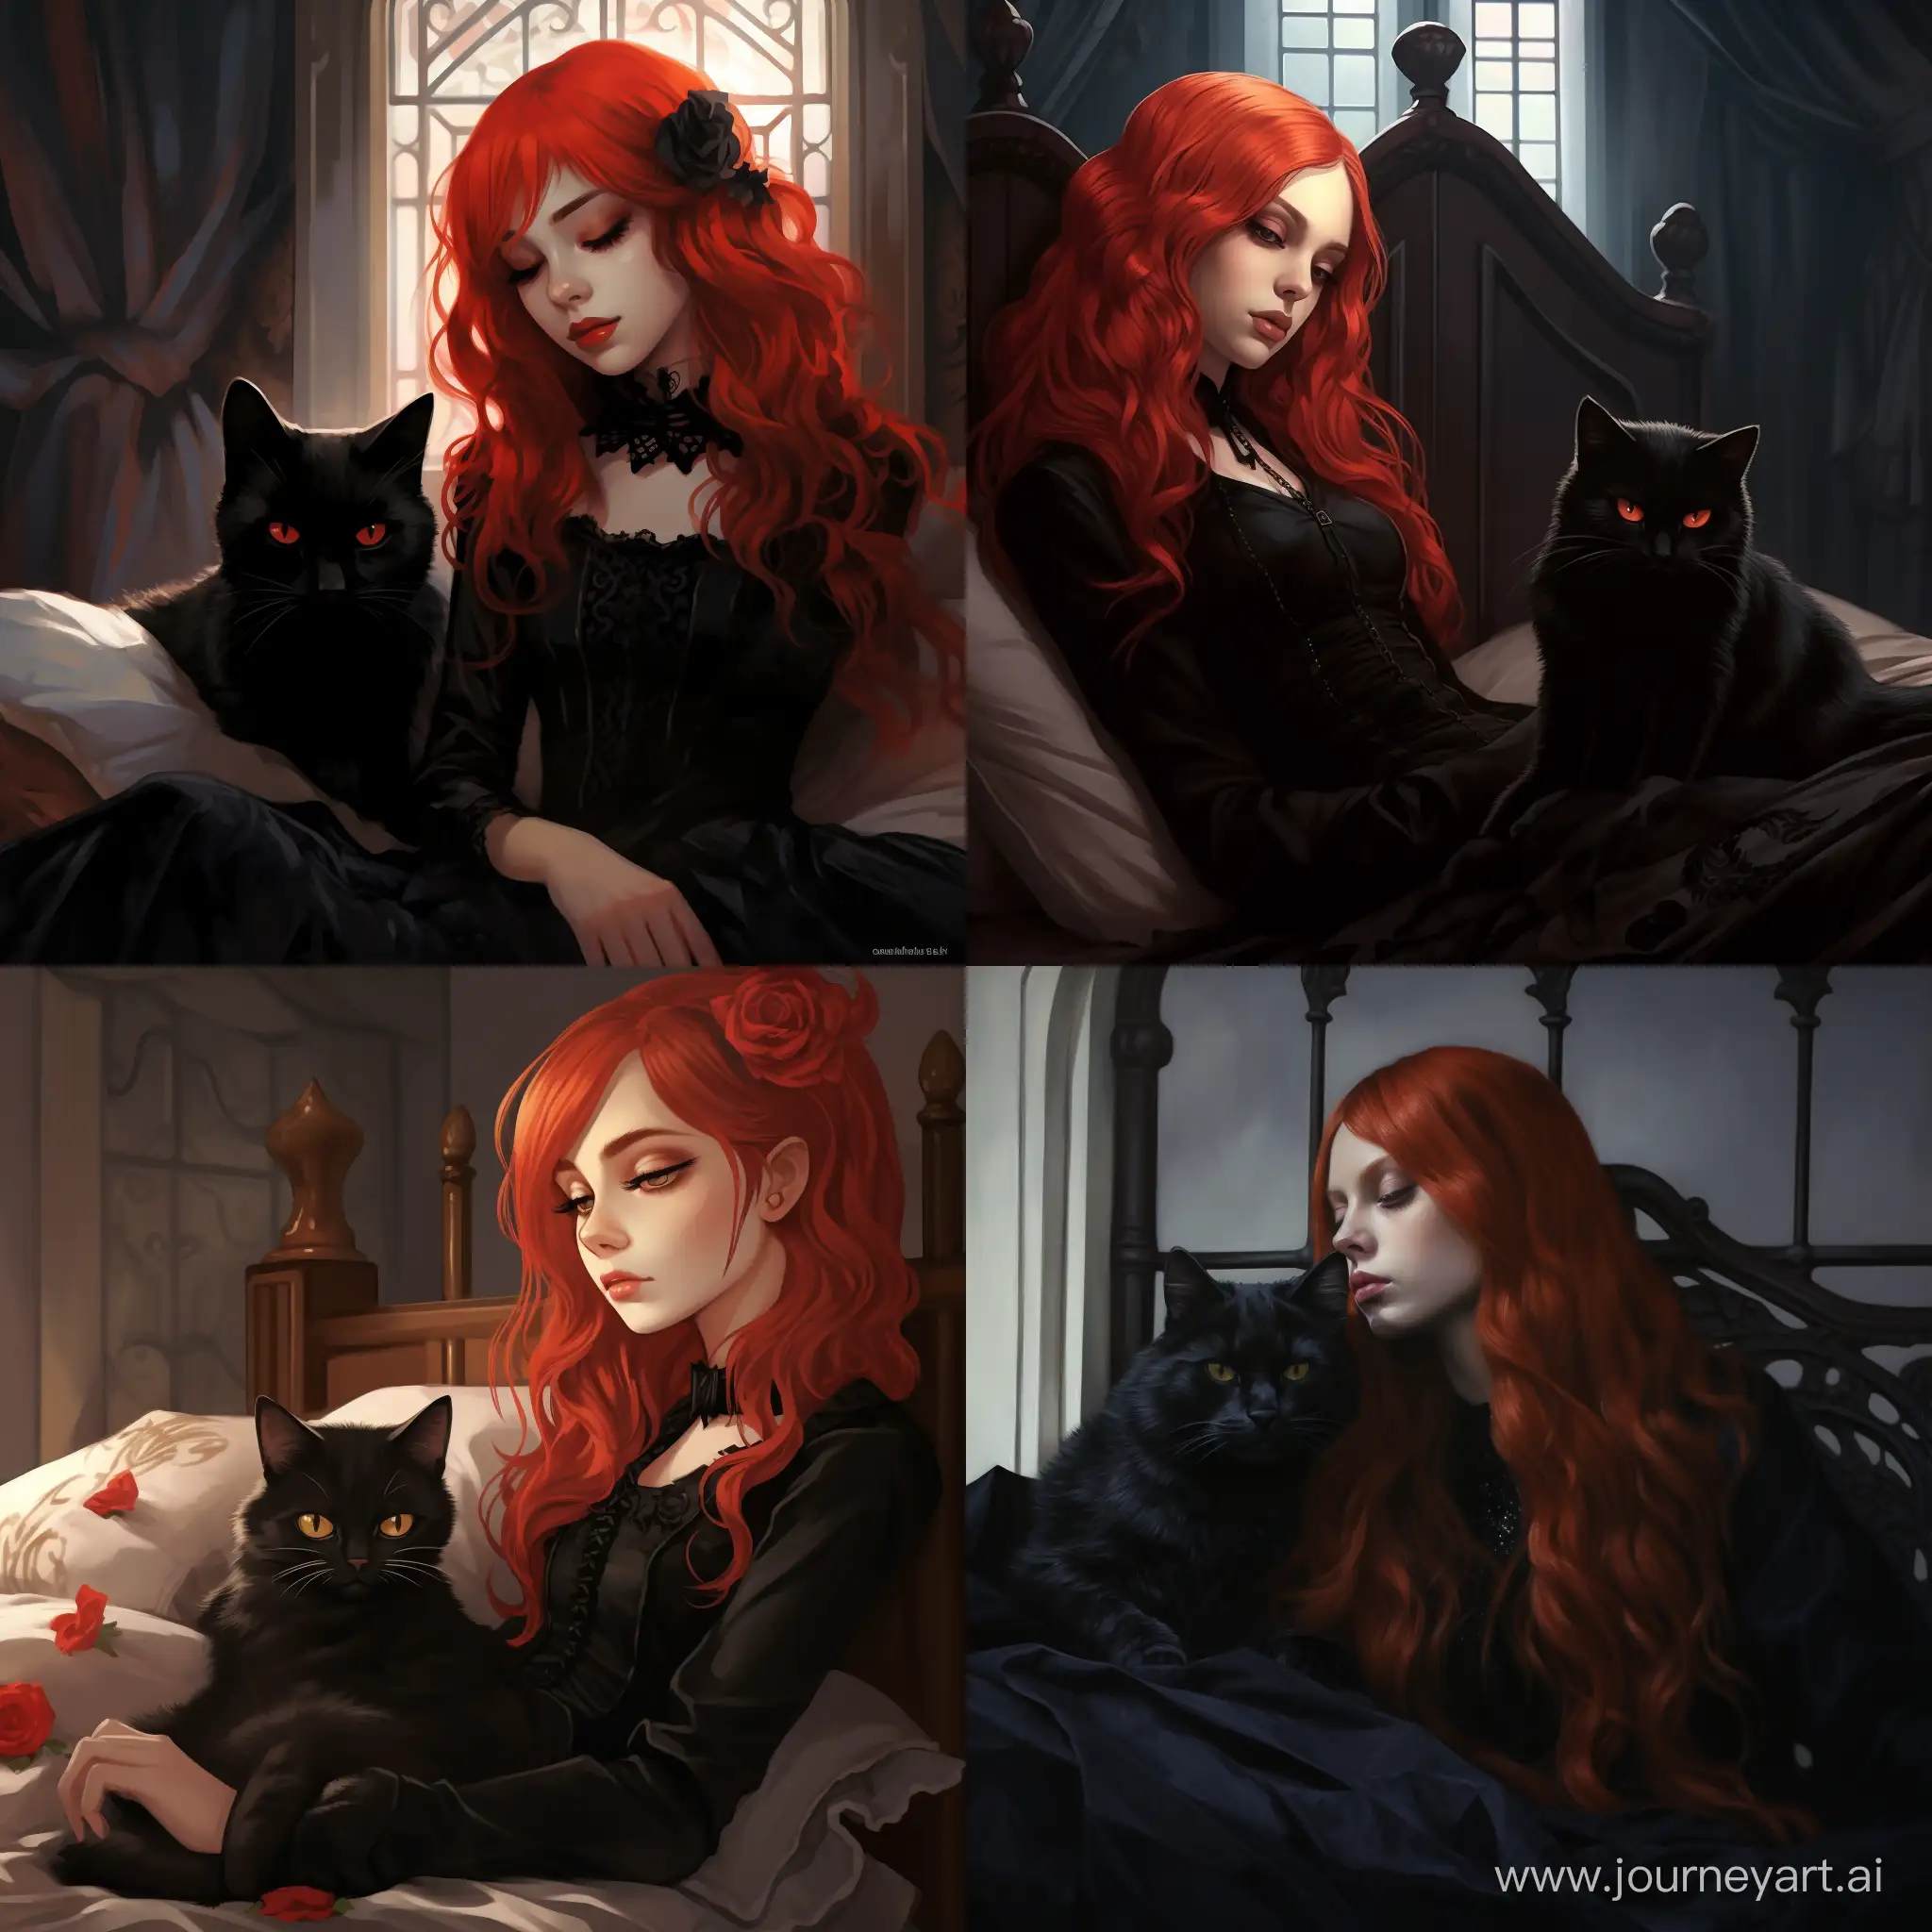 A girl with red hair in a black Gothic dress sleeps on a bed next to a Gothic-style cat

